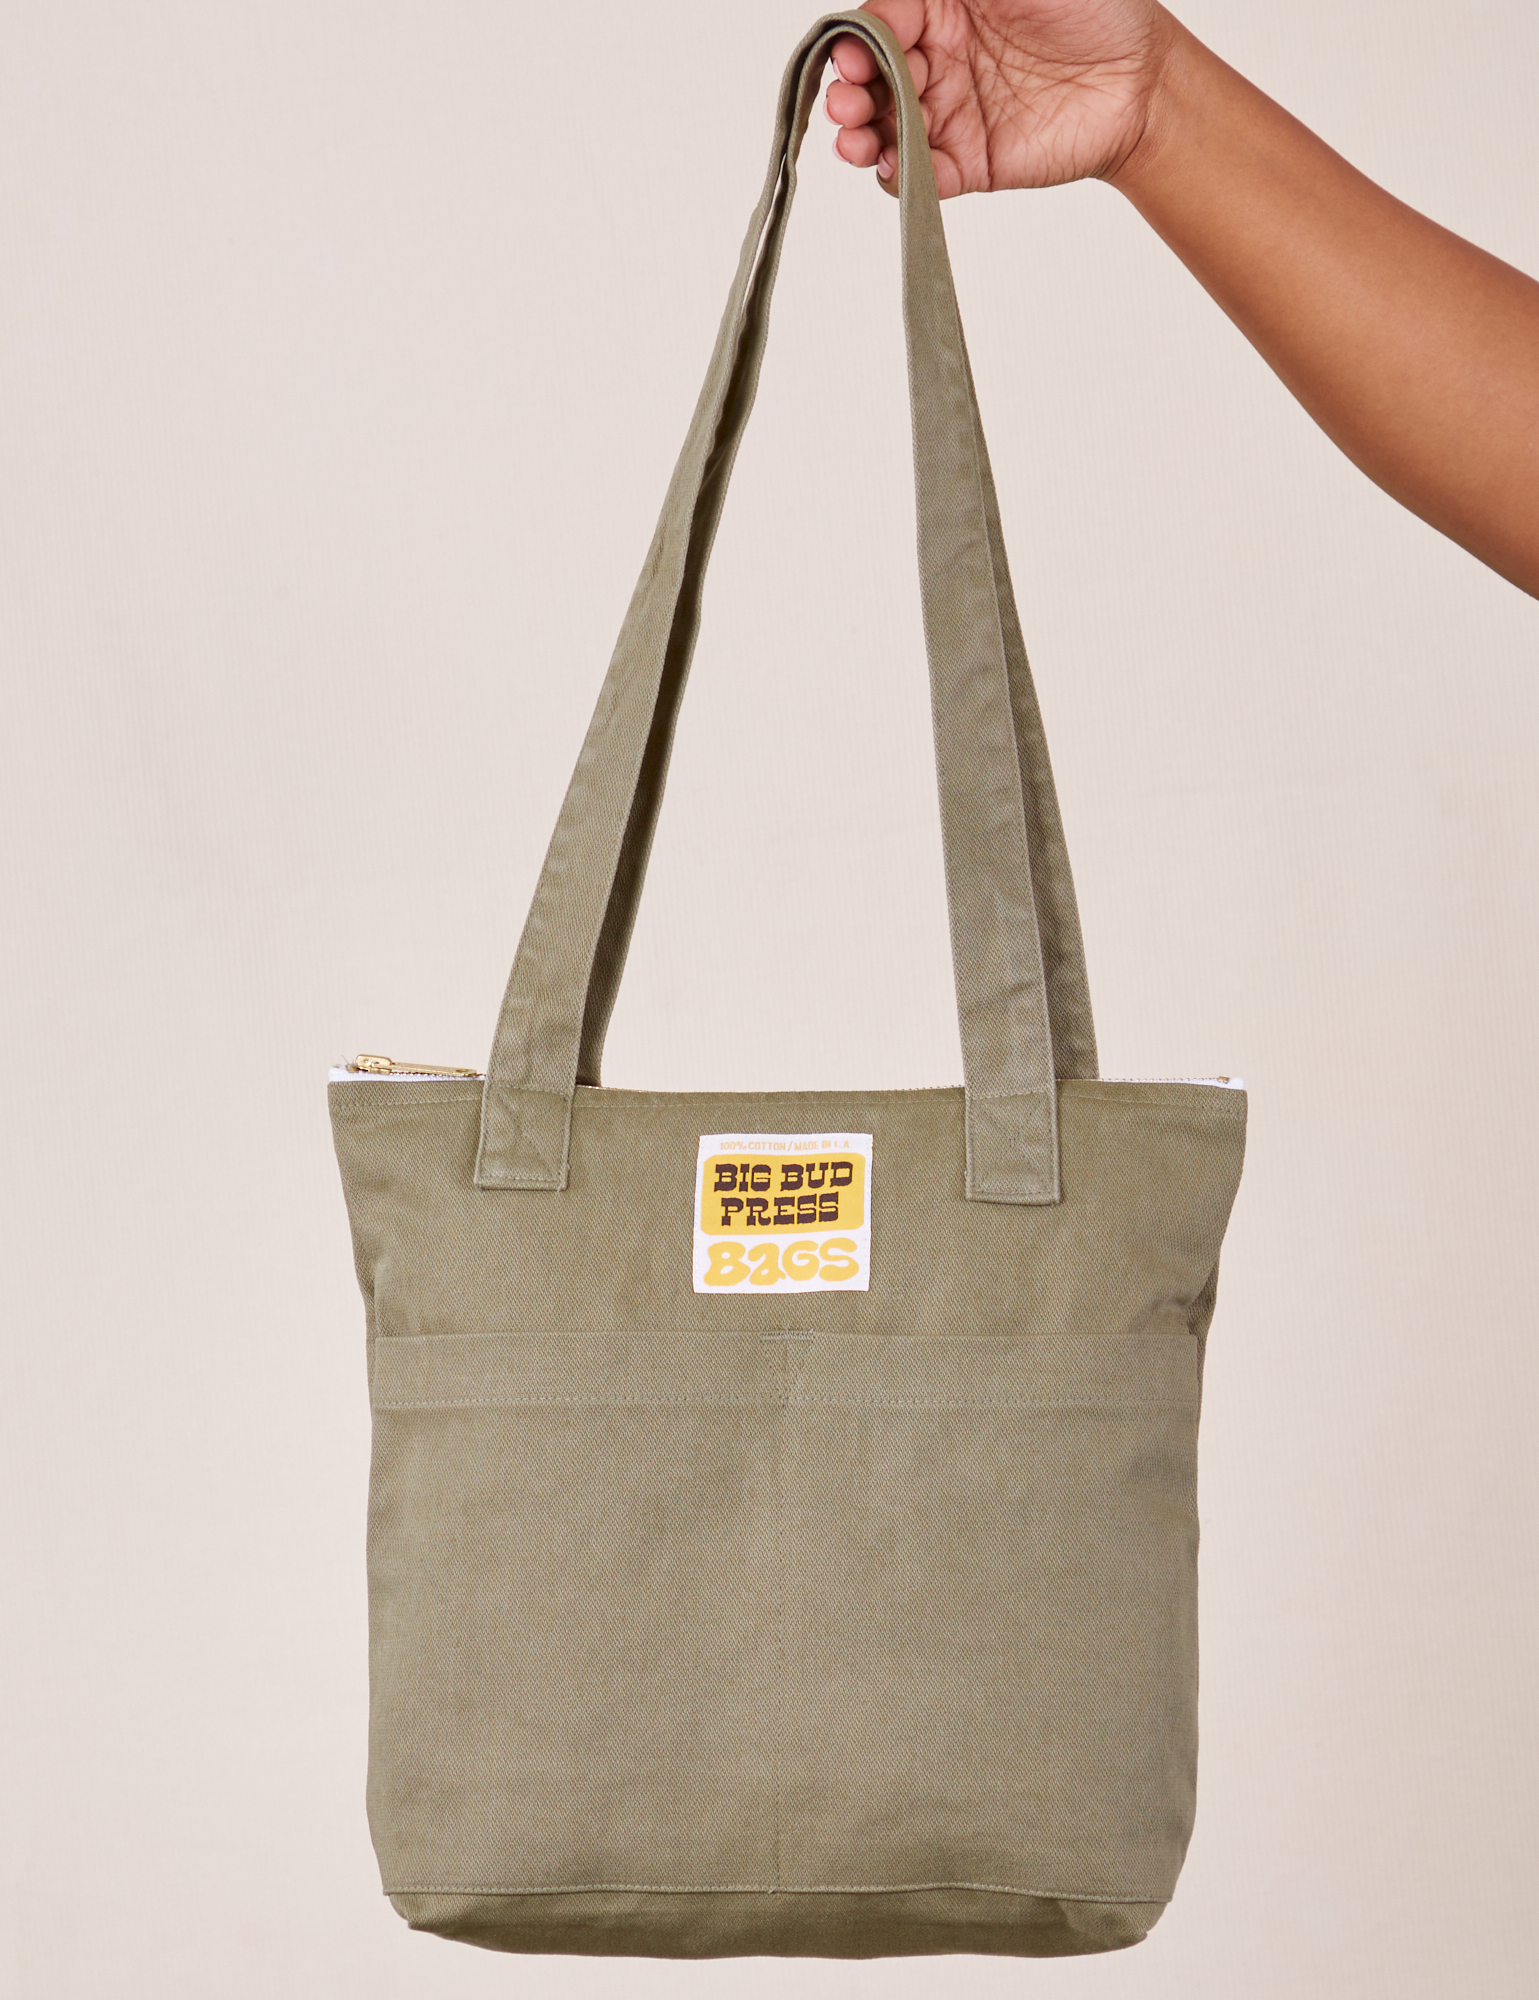 Custom Natural Cotton Tote with Zipper and Inside Pocket | Bag-all Black